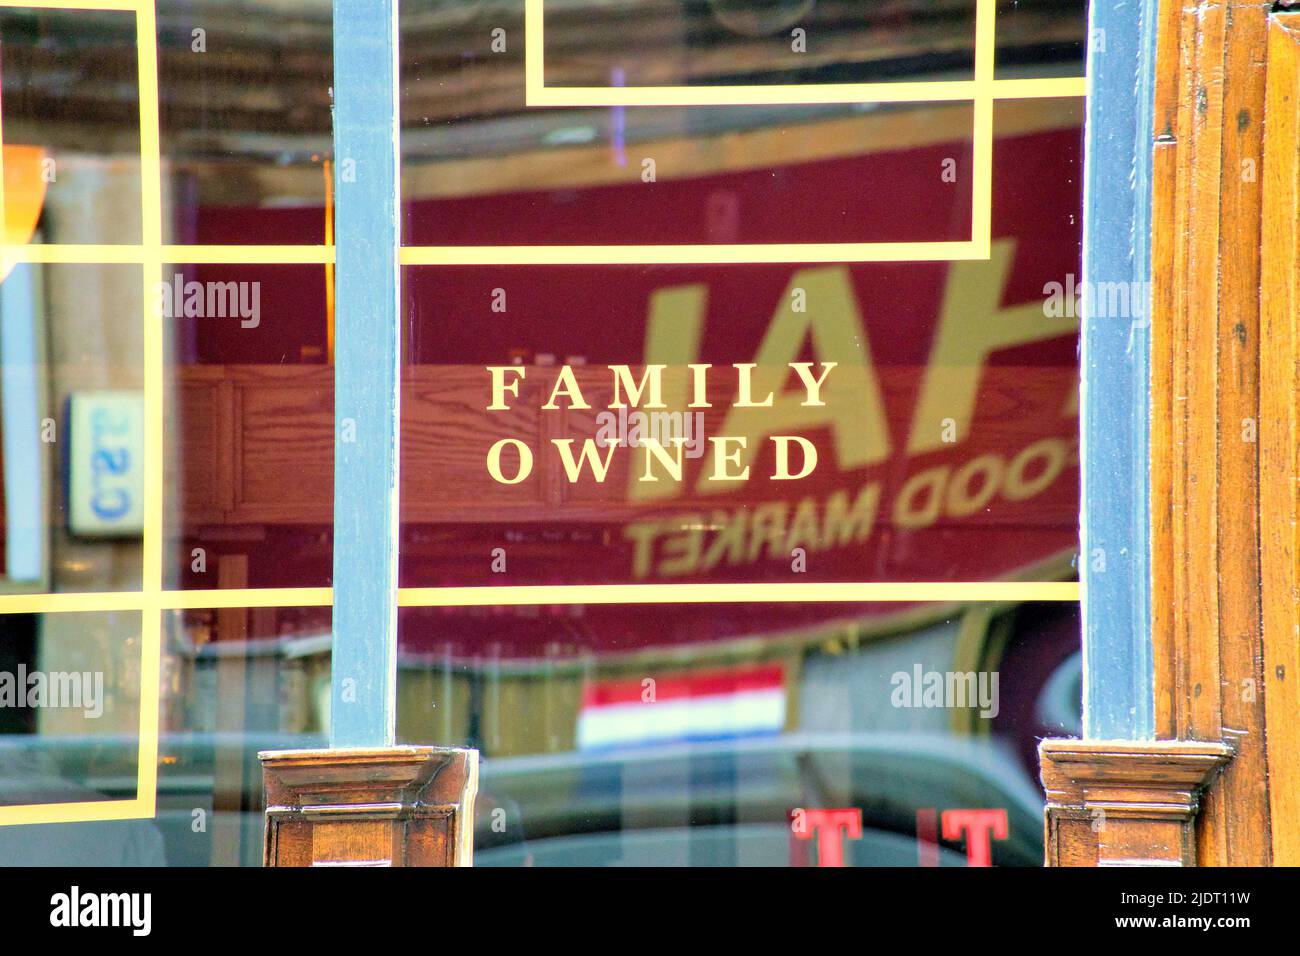 family owned business sign Stock Photo